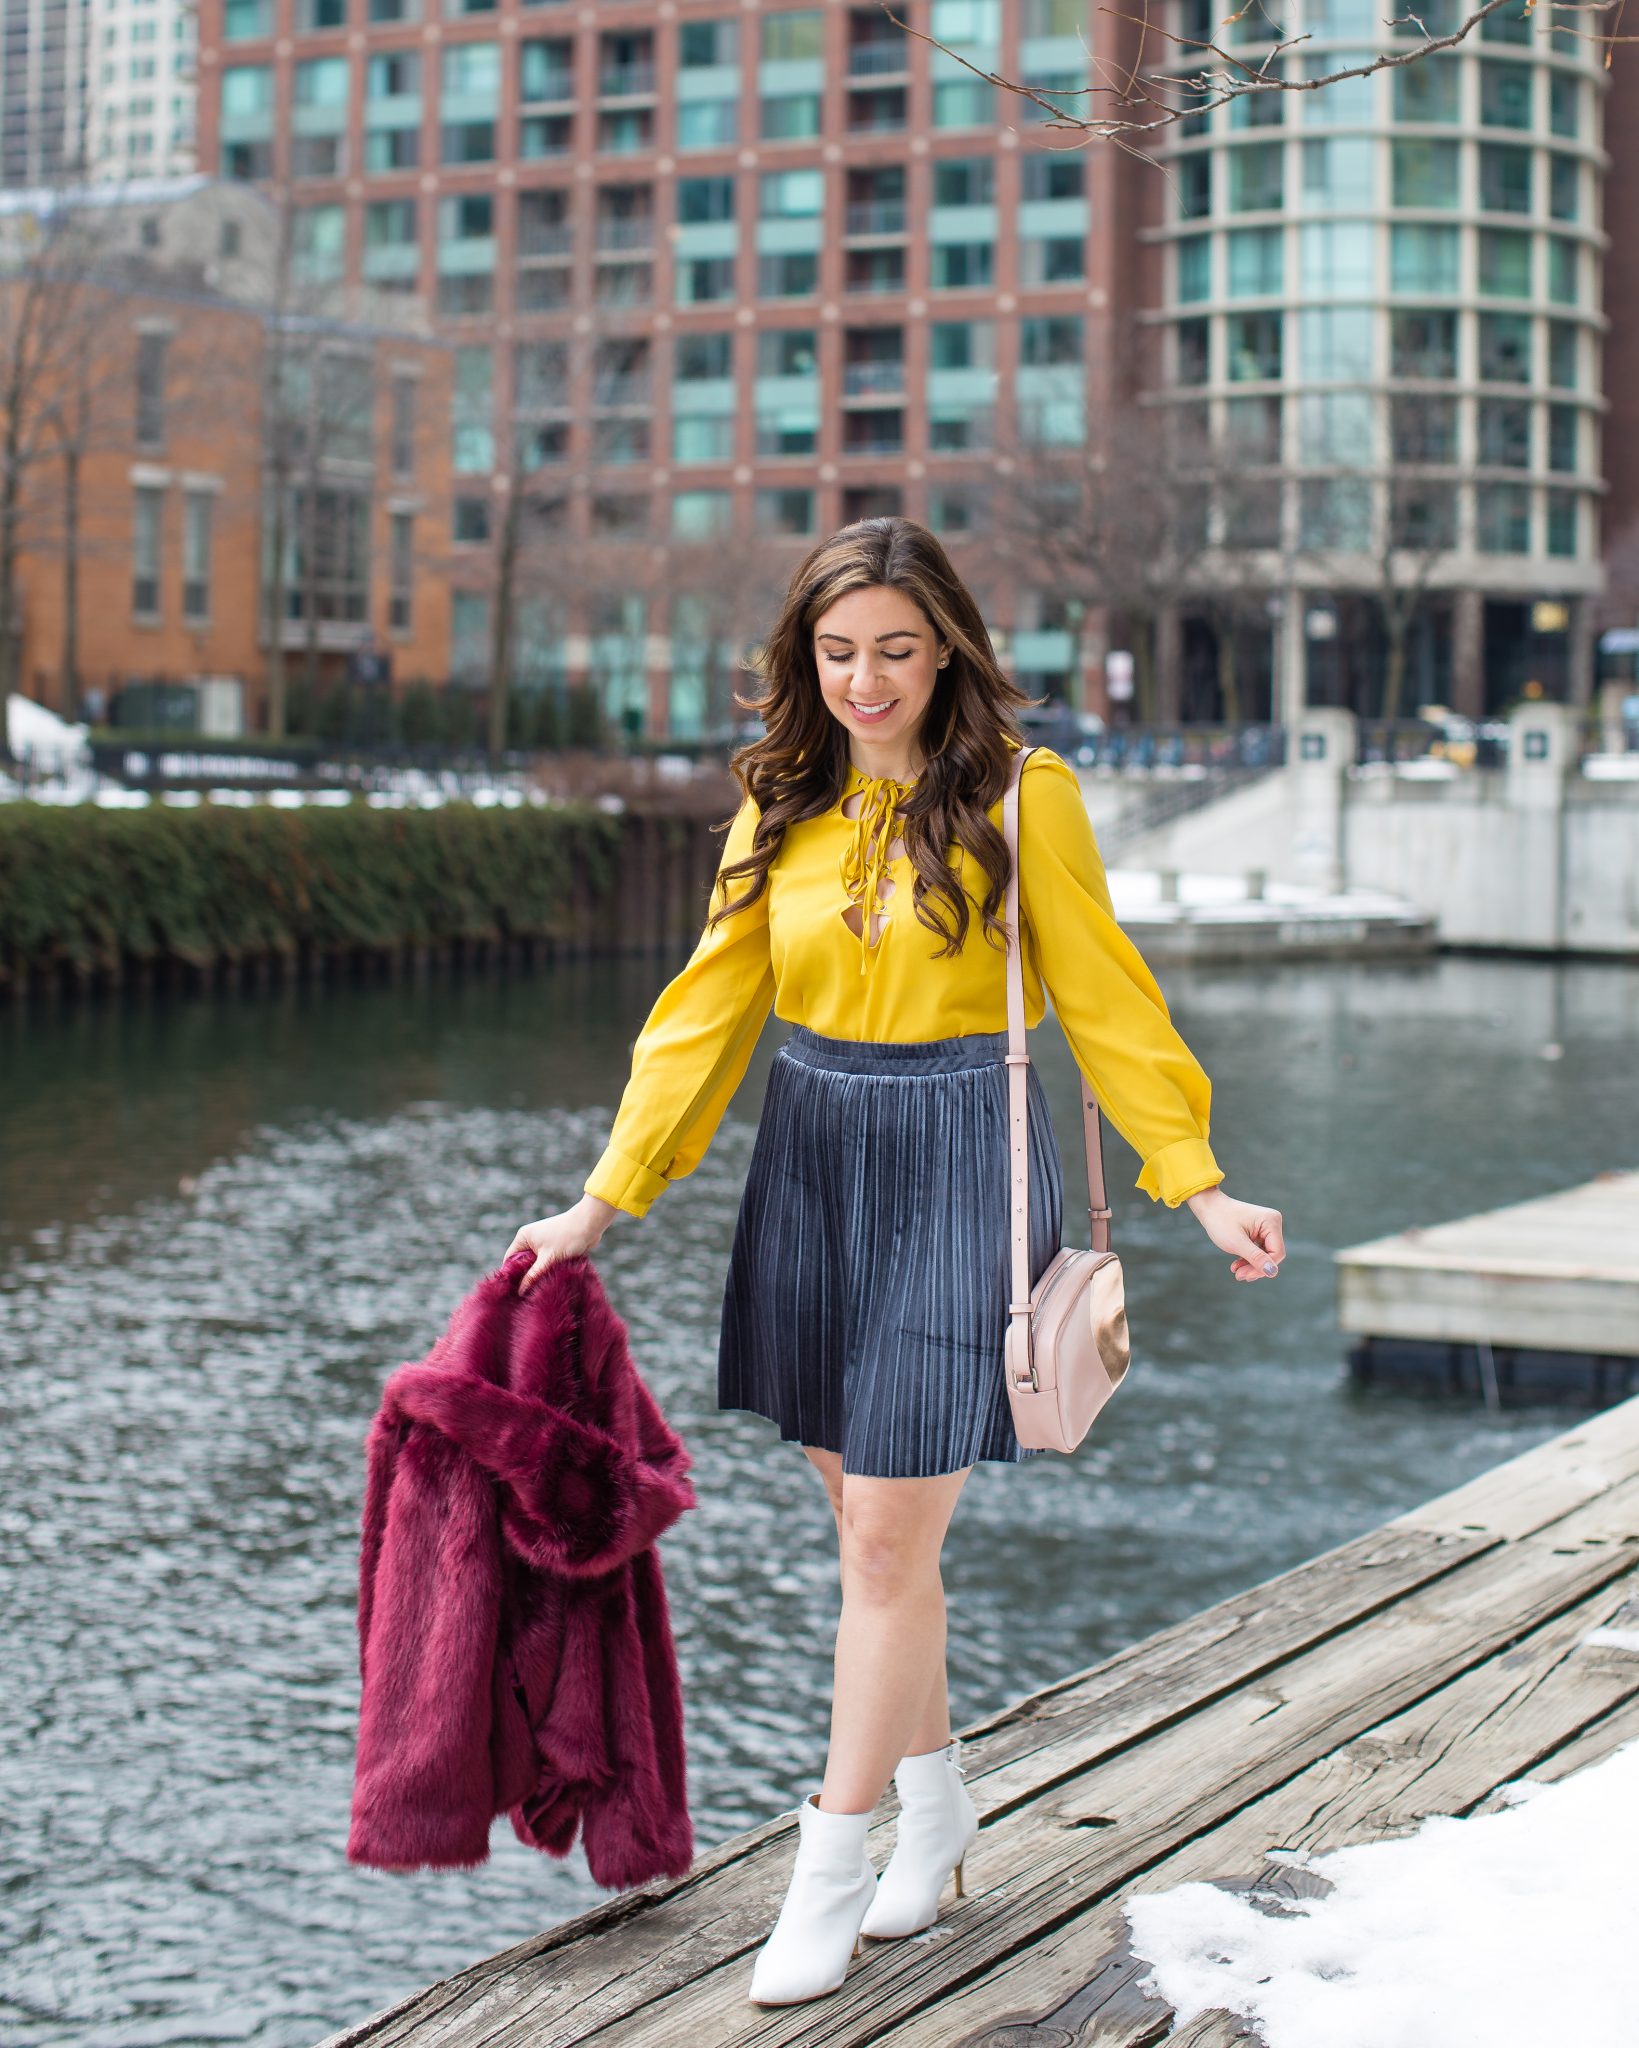 Lifestyle blogger Roxanne of Glass of Glam wearing a missguided faux fur coat, Shein mustard top, Asos velvet skirt, and white booties - A primary colors outfit by popular Chicago fashion blogger Glass of Glam 